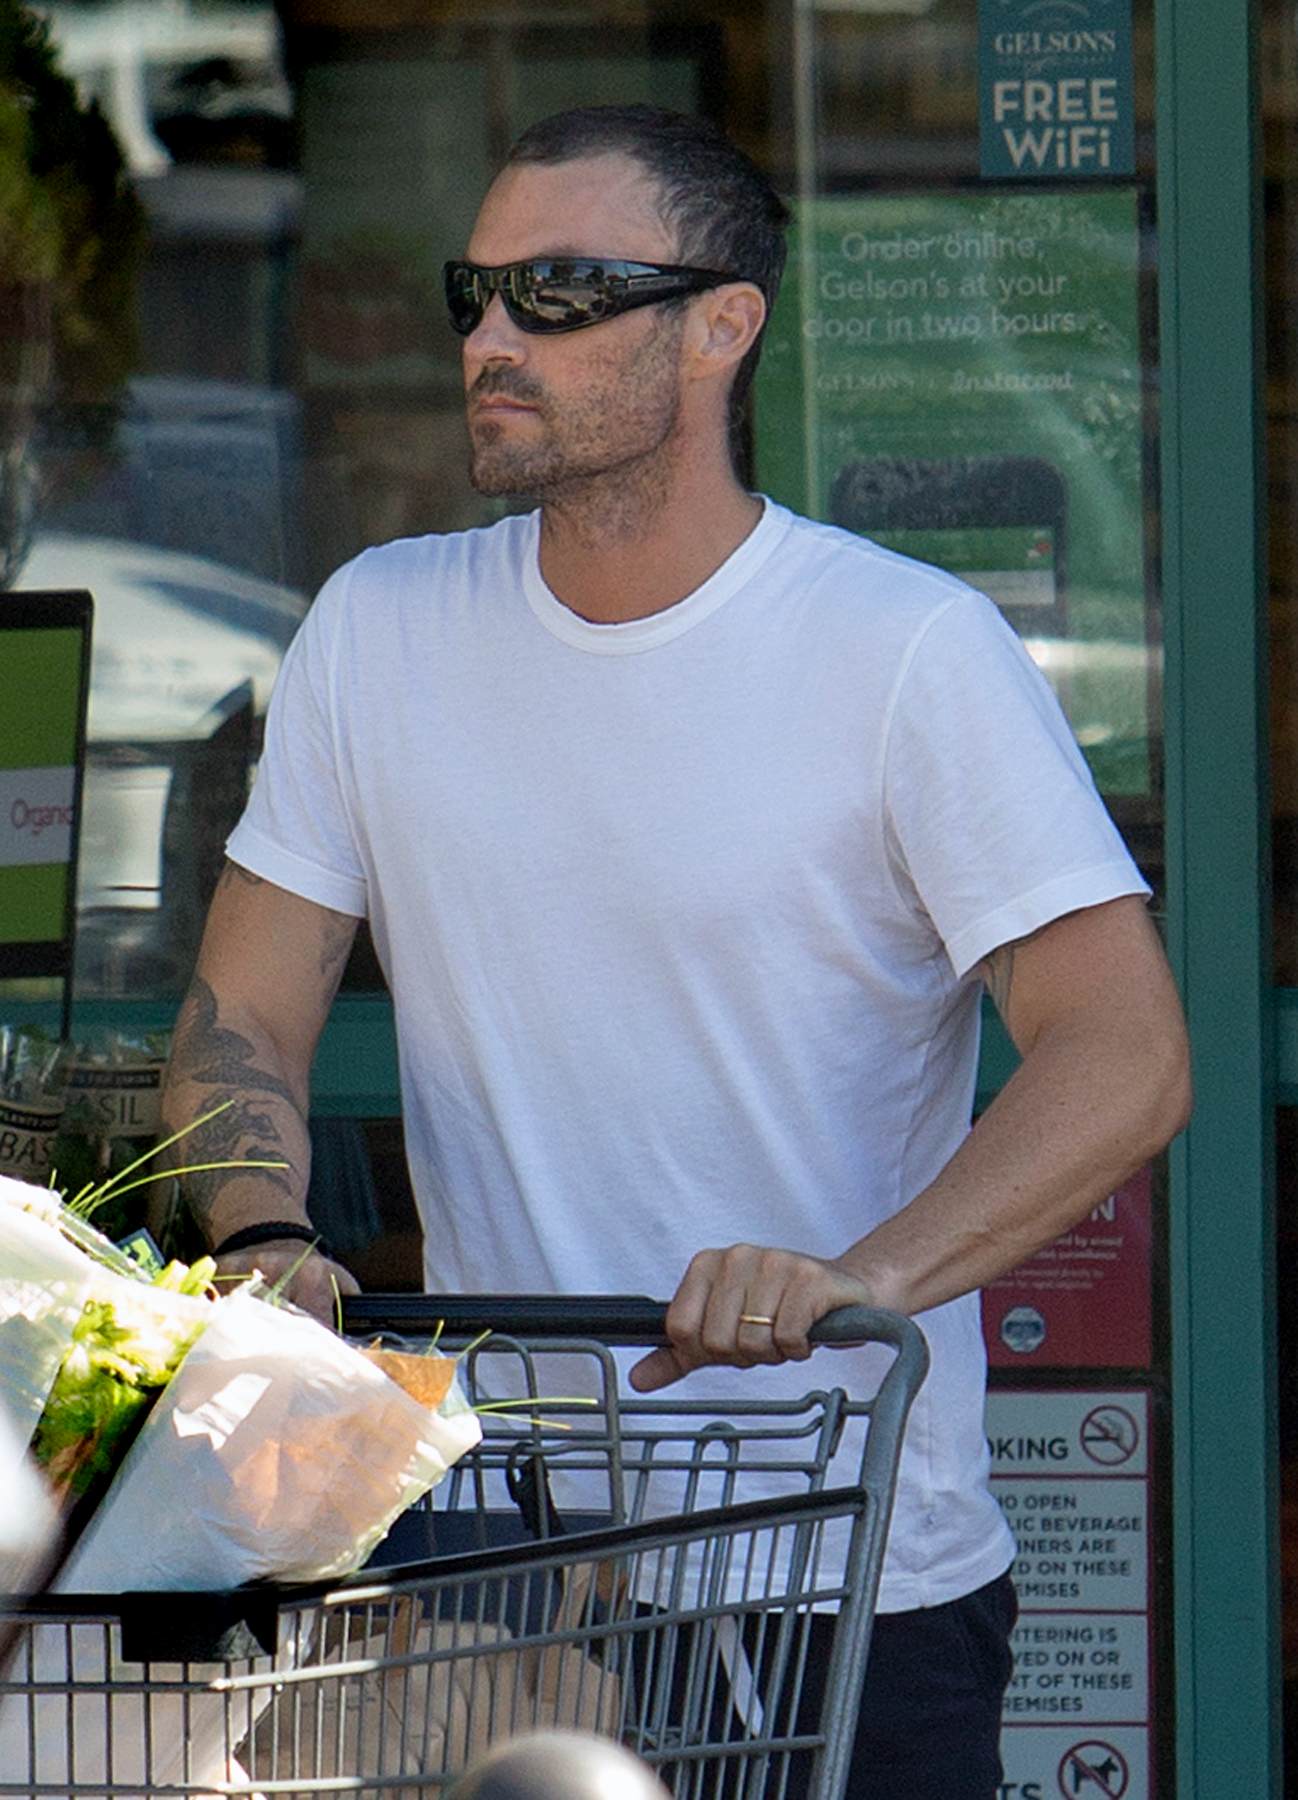 Brian Austin Green Still Wearing His Ring As He Shops Gelsons Store